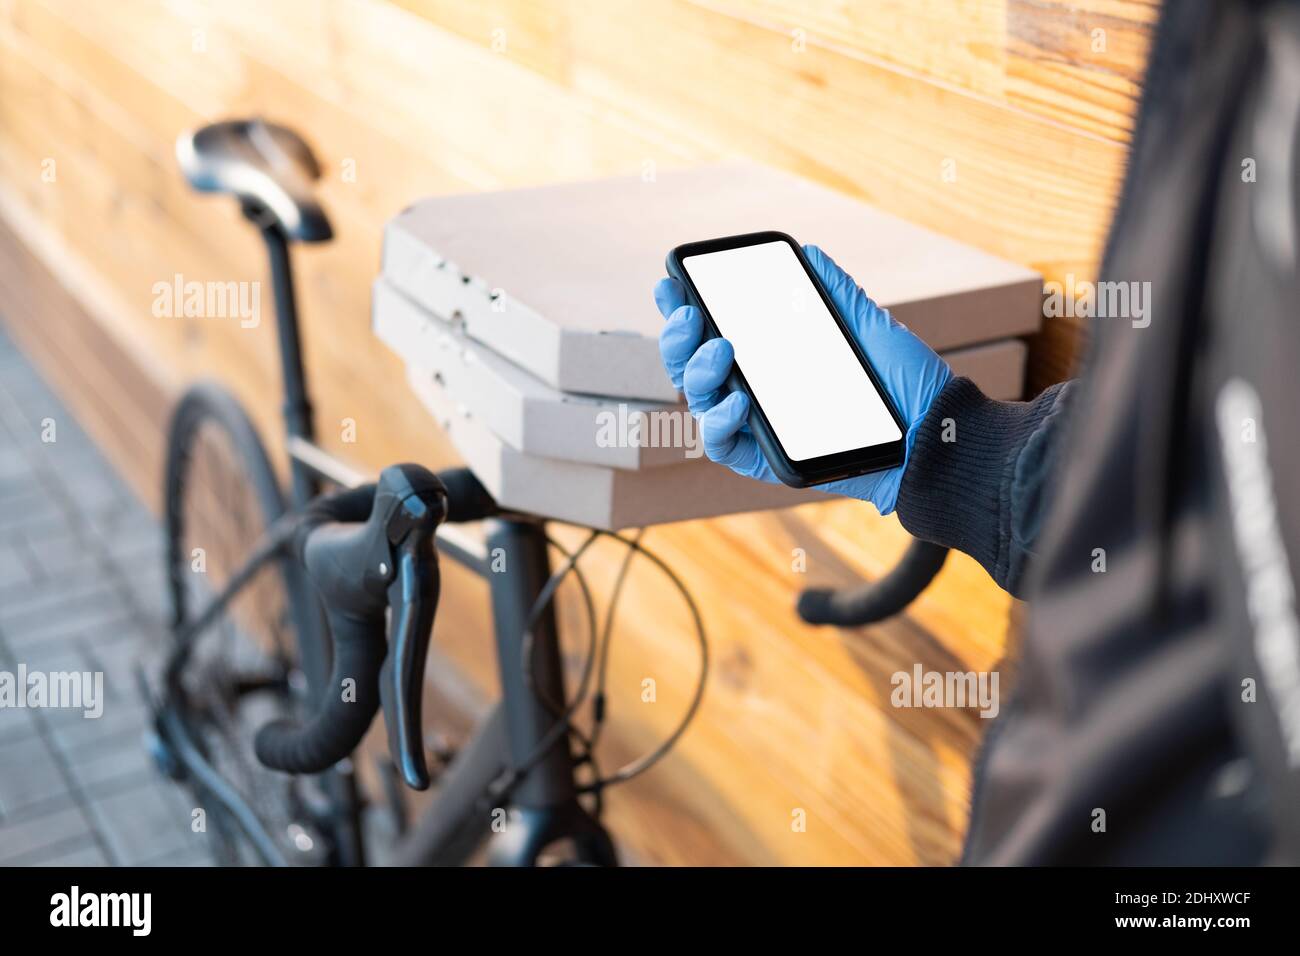 Delivery person standing next to a bicycle with pizza boxes holds a phone with whote screen. Job as a courier, bike messenger profession, part time wo Stock Photo